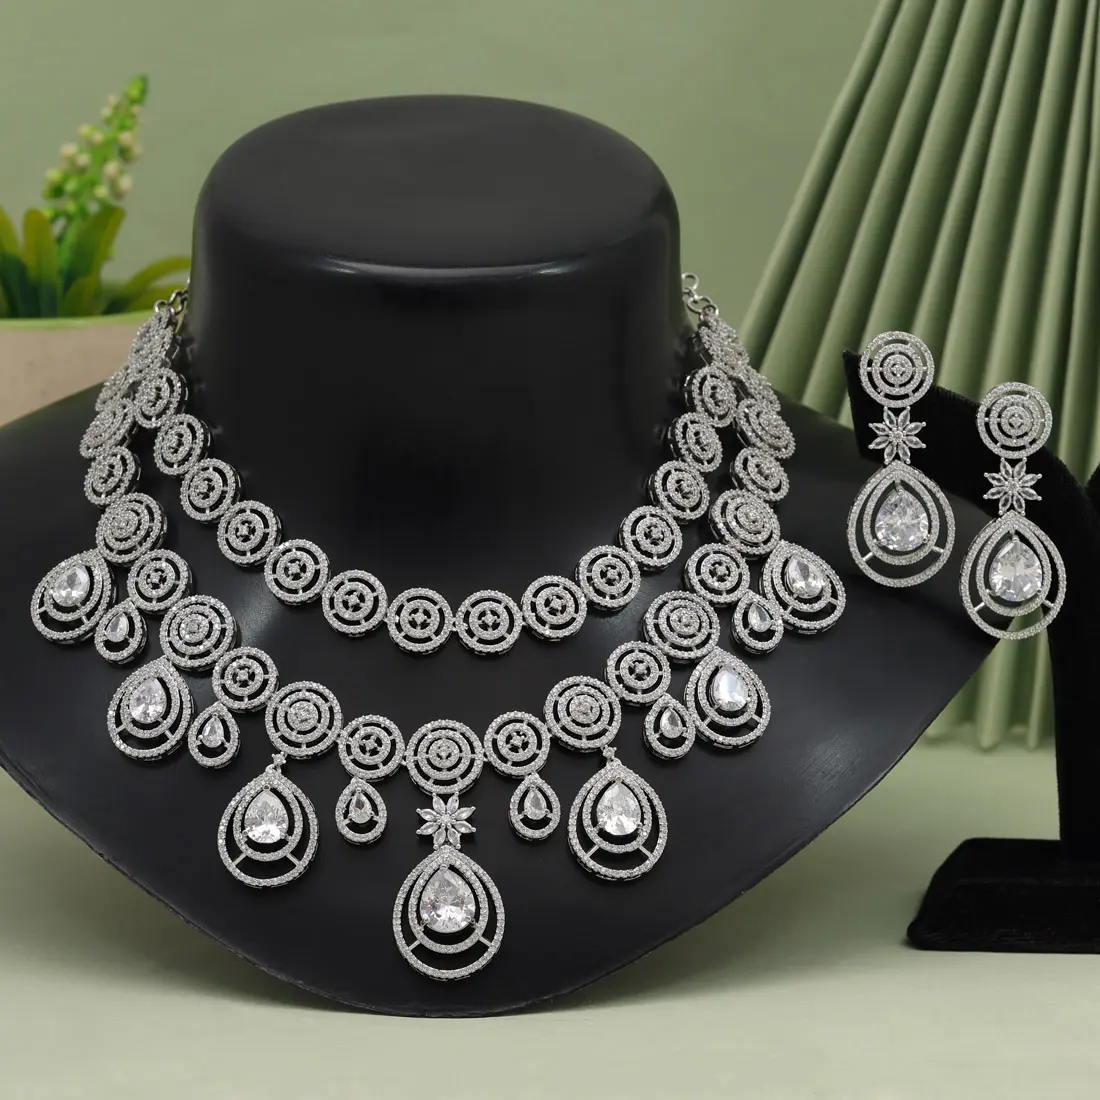 Latest Luxury Exclusive Designer Fashion AD/CZ Heavy American Diamond Premium Necklace Set Collection For Girls and women's